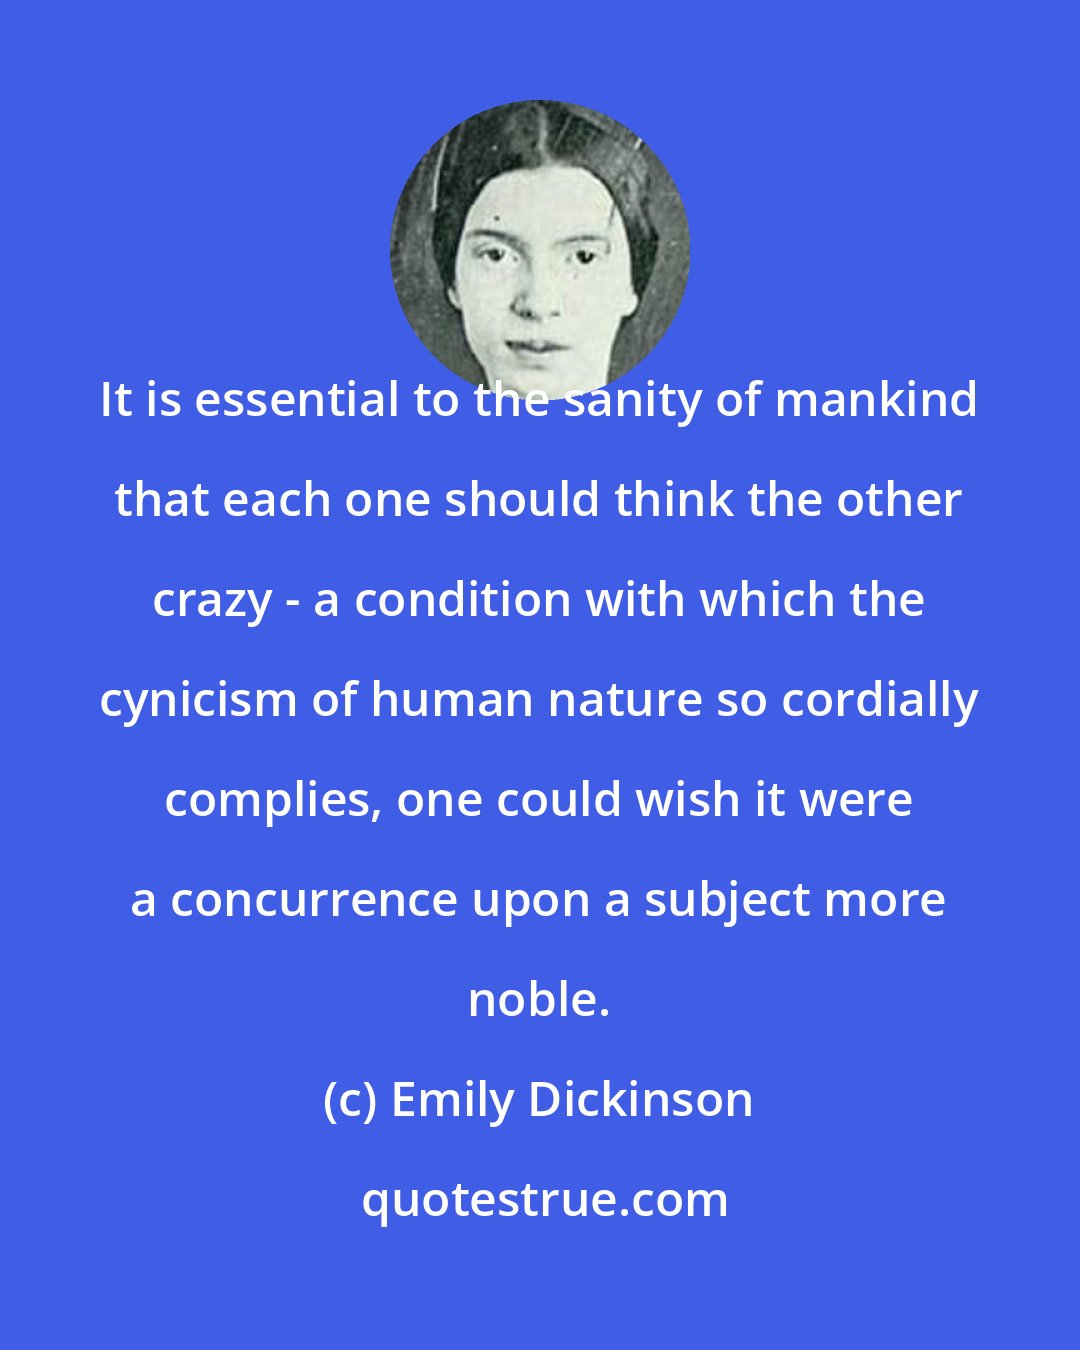 Emily Dickinson: It is essential to the sanity of mankind that each one should think the other crazy - a condition with which the cynicism of human nature so cordially complies, one could wish it were a concurrence upon a subject more noble.